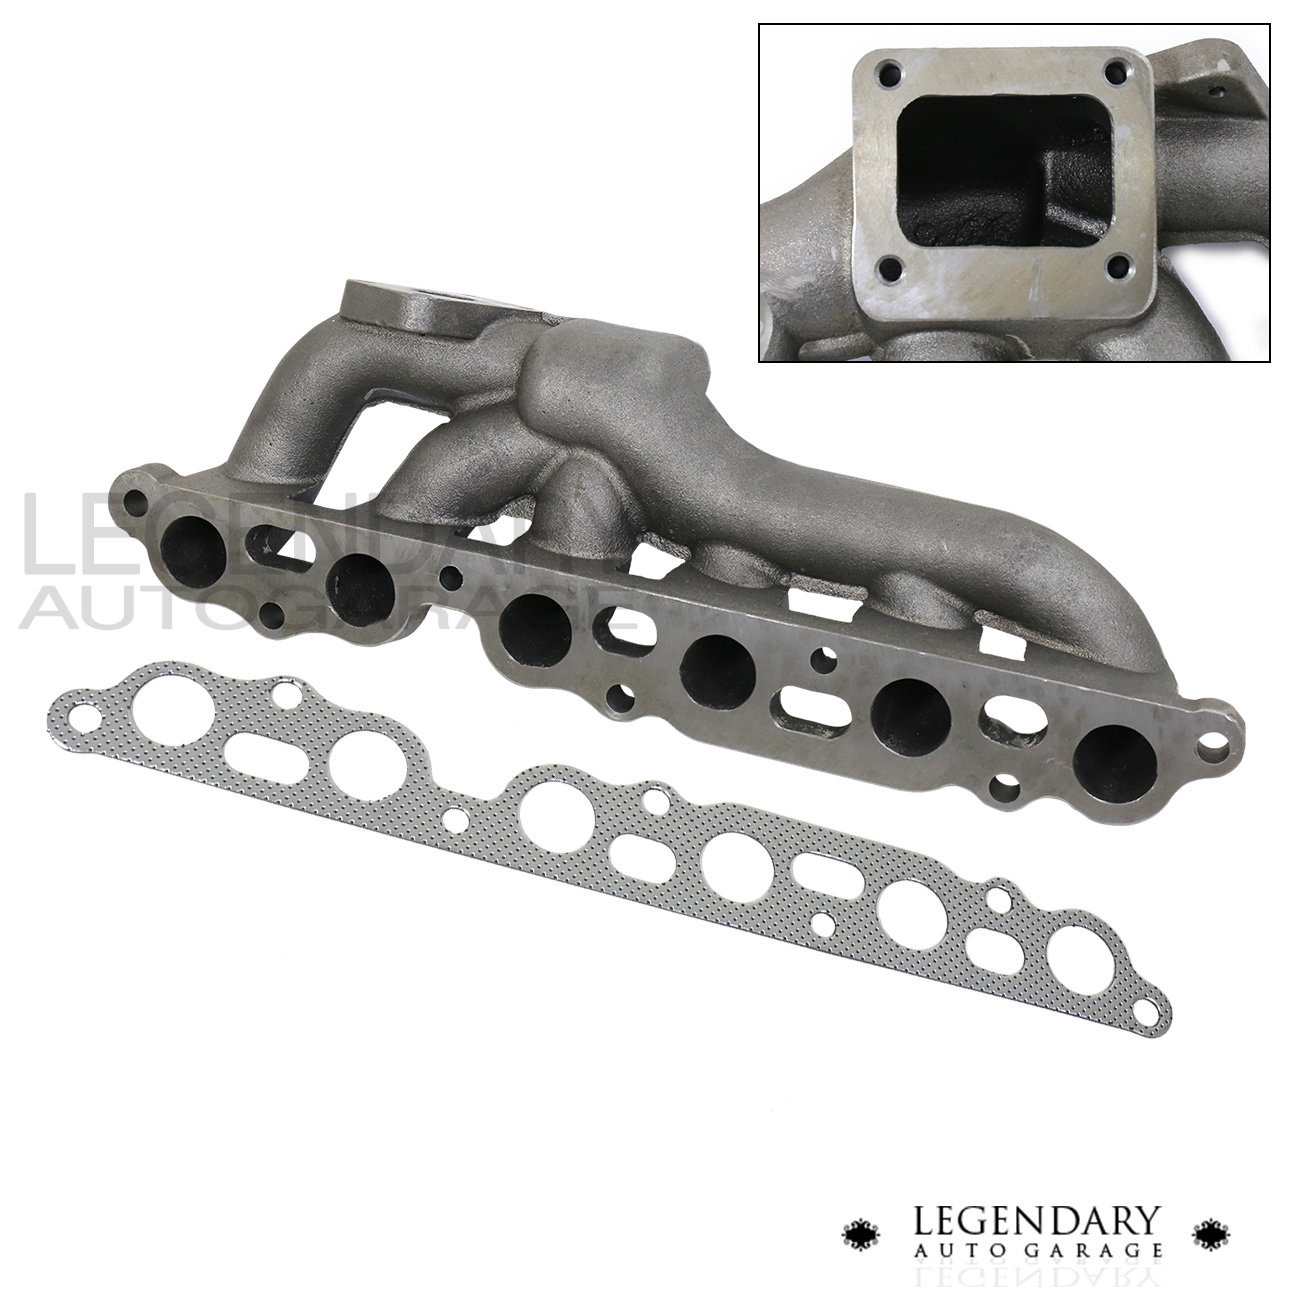 T4 Flange Cast Iron Exhaust Turbo Manifold Kit For 86-92 Toyota Supra ...